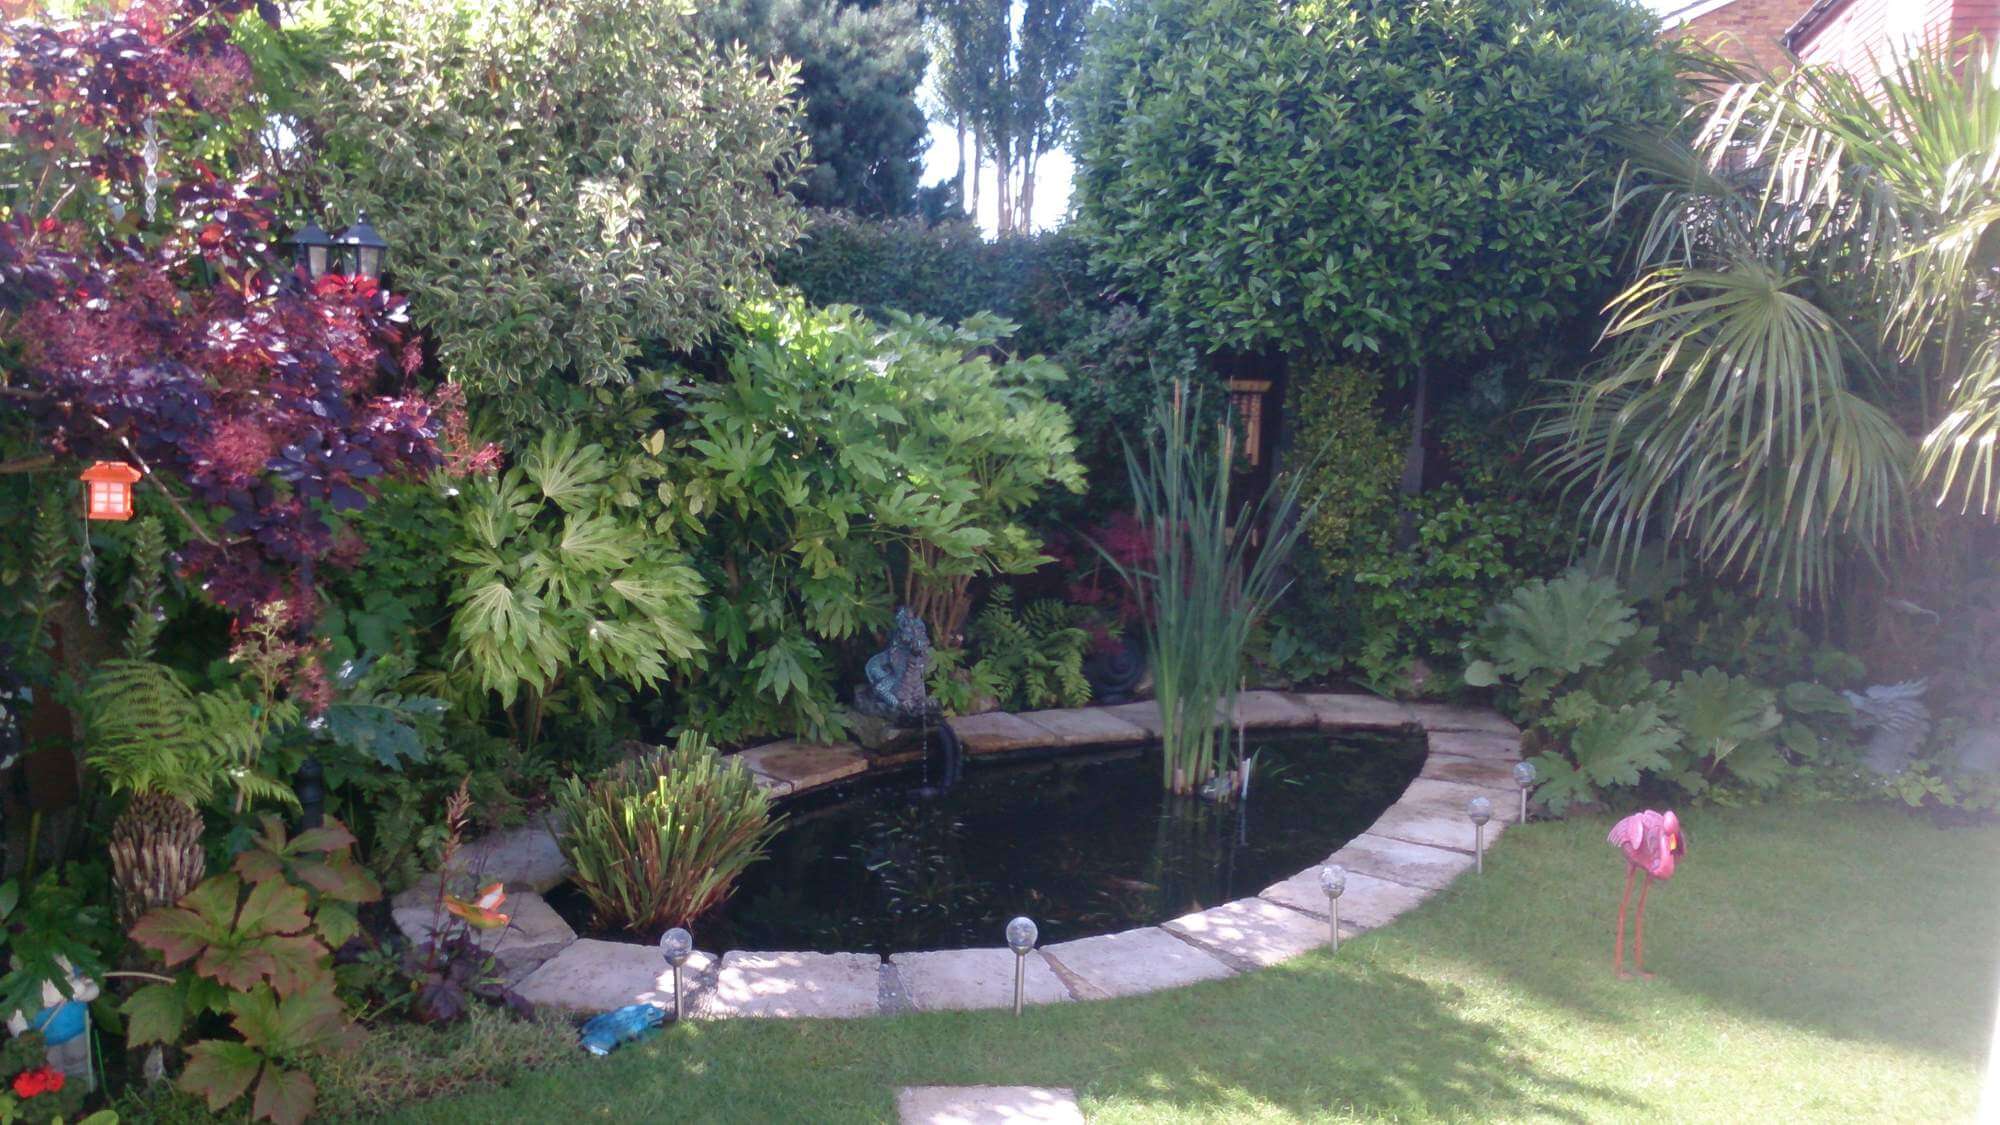 A well structured and nicely positioned pond in Happydays' garden 